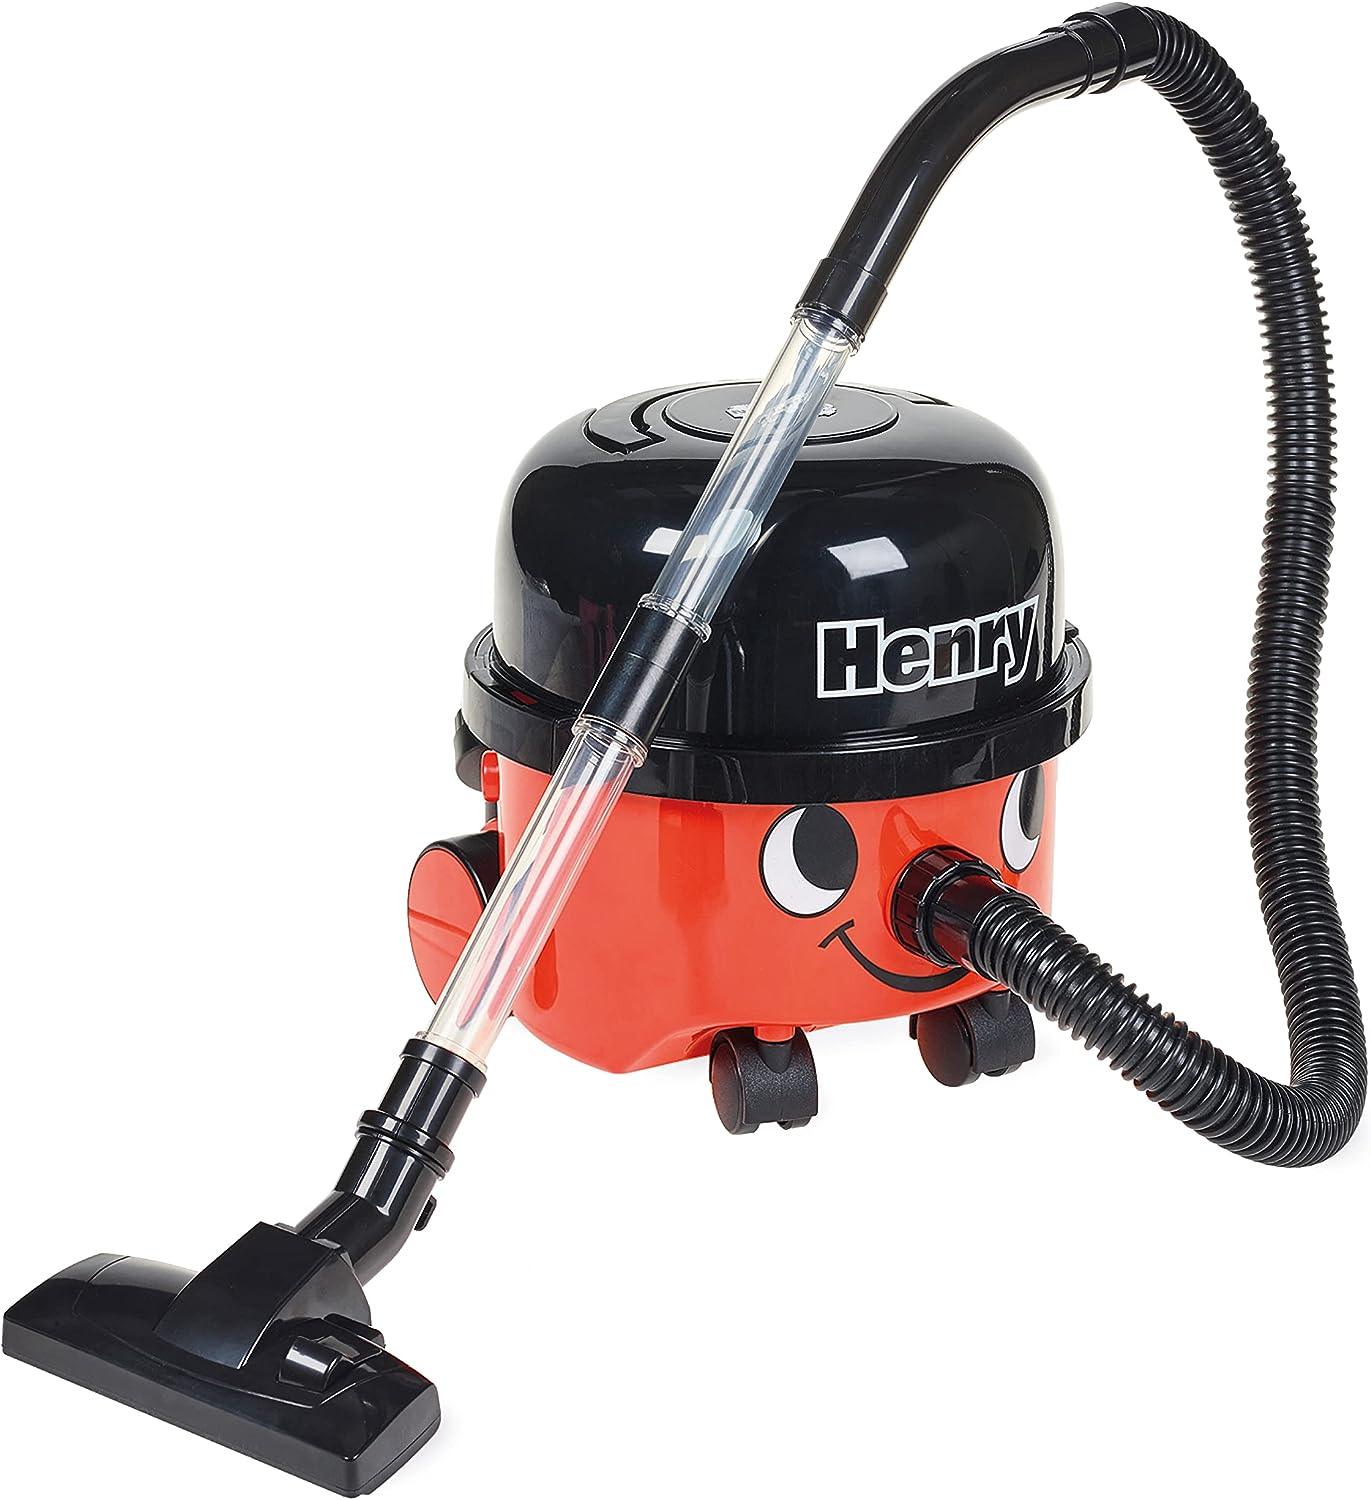 Buy Henry Bagged Corded Cylinder Vacuum Cleaner - Red, Vacuum cleaners